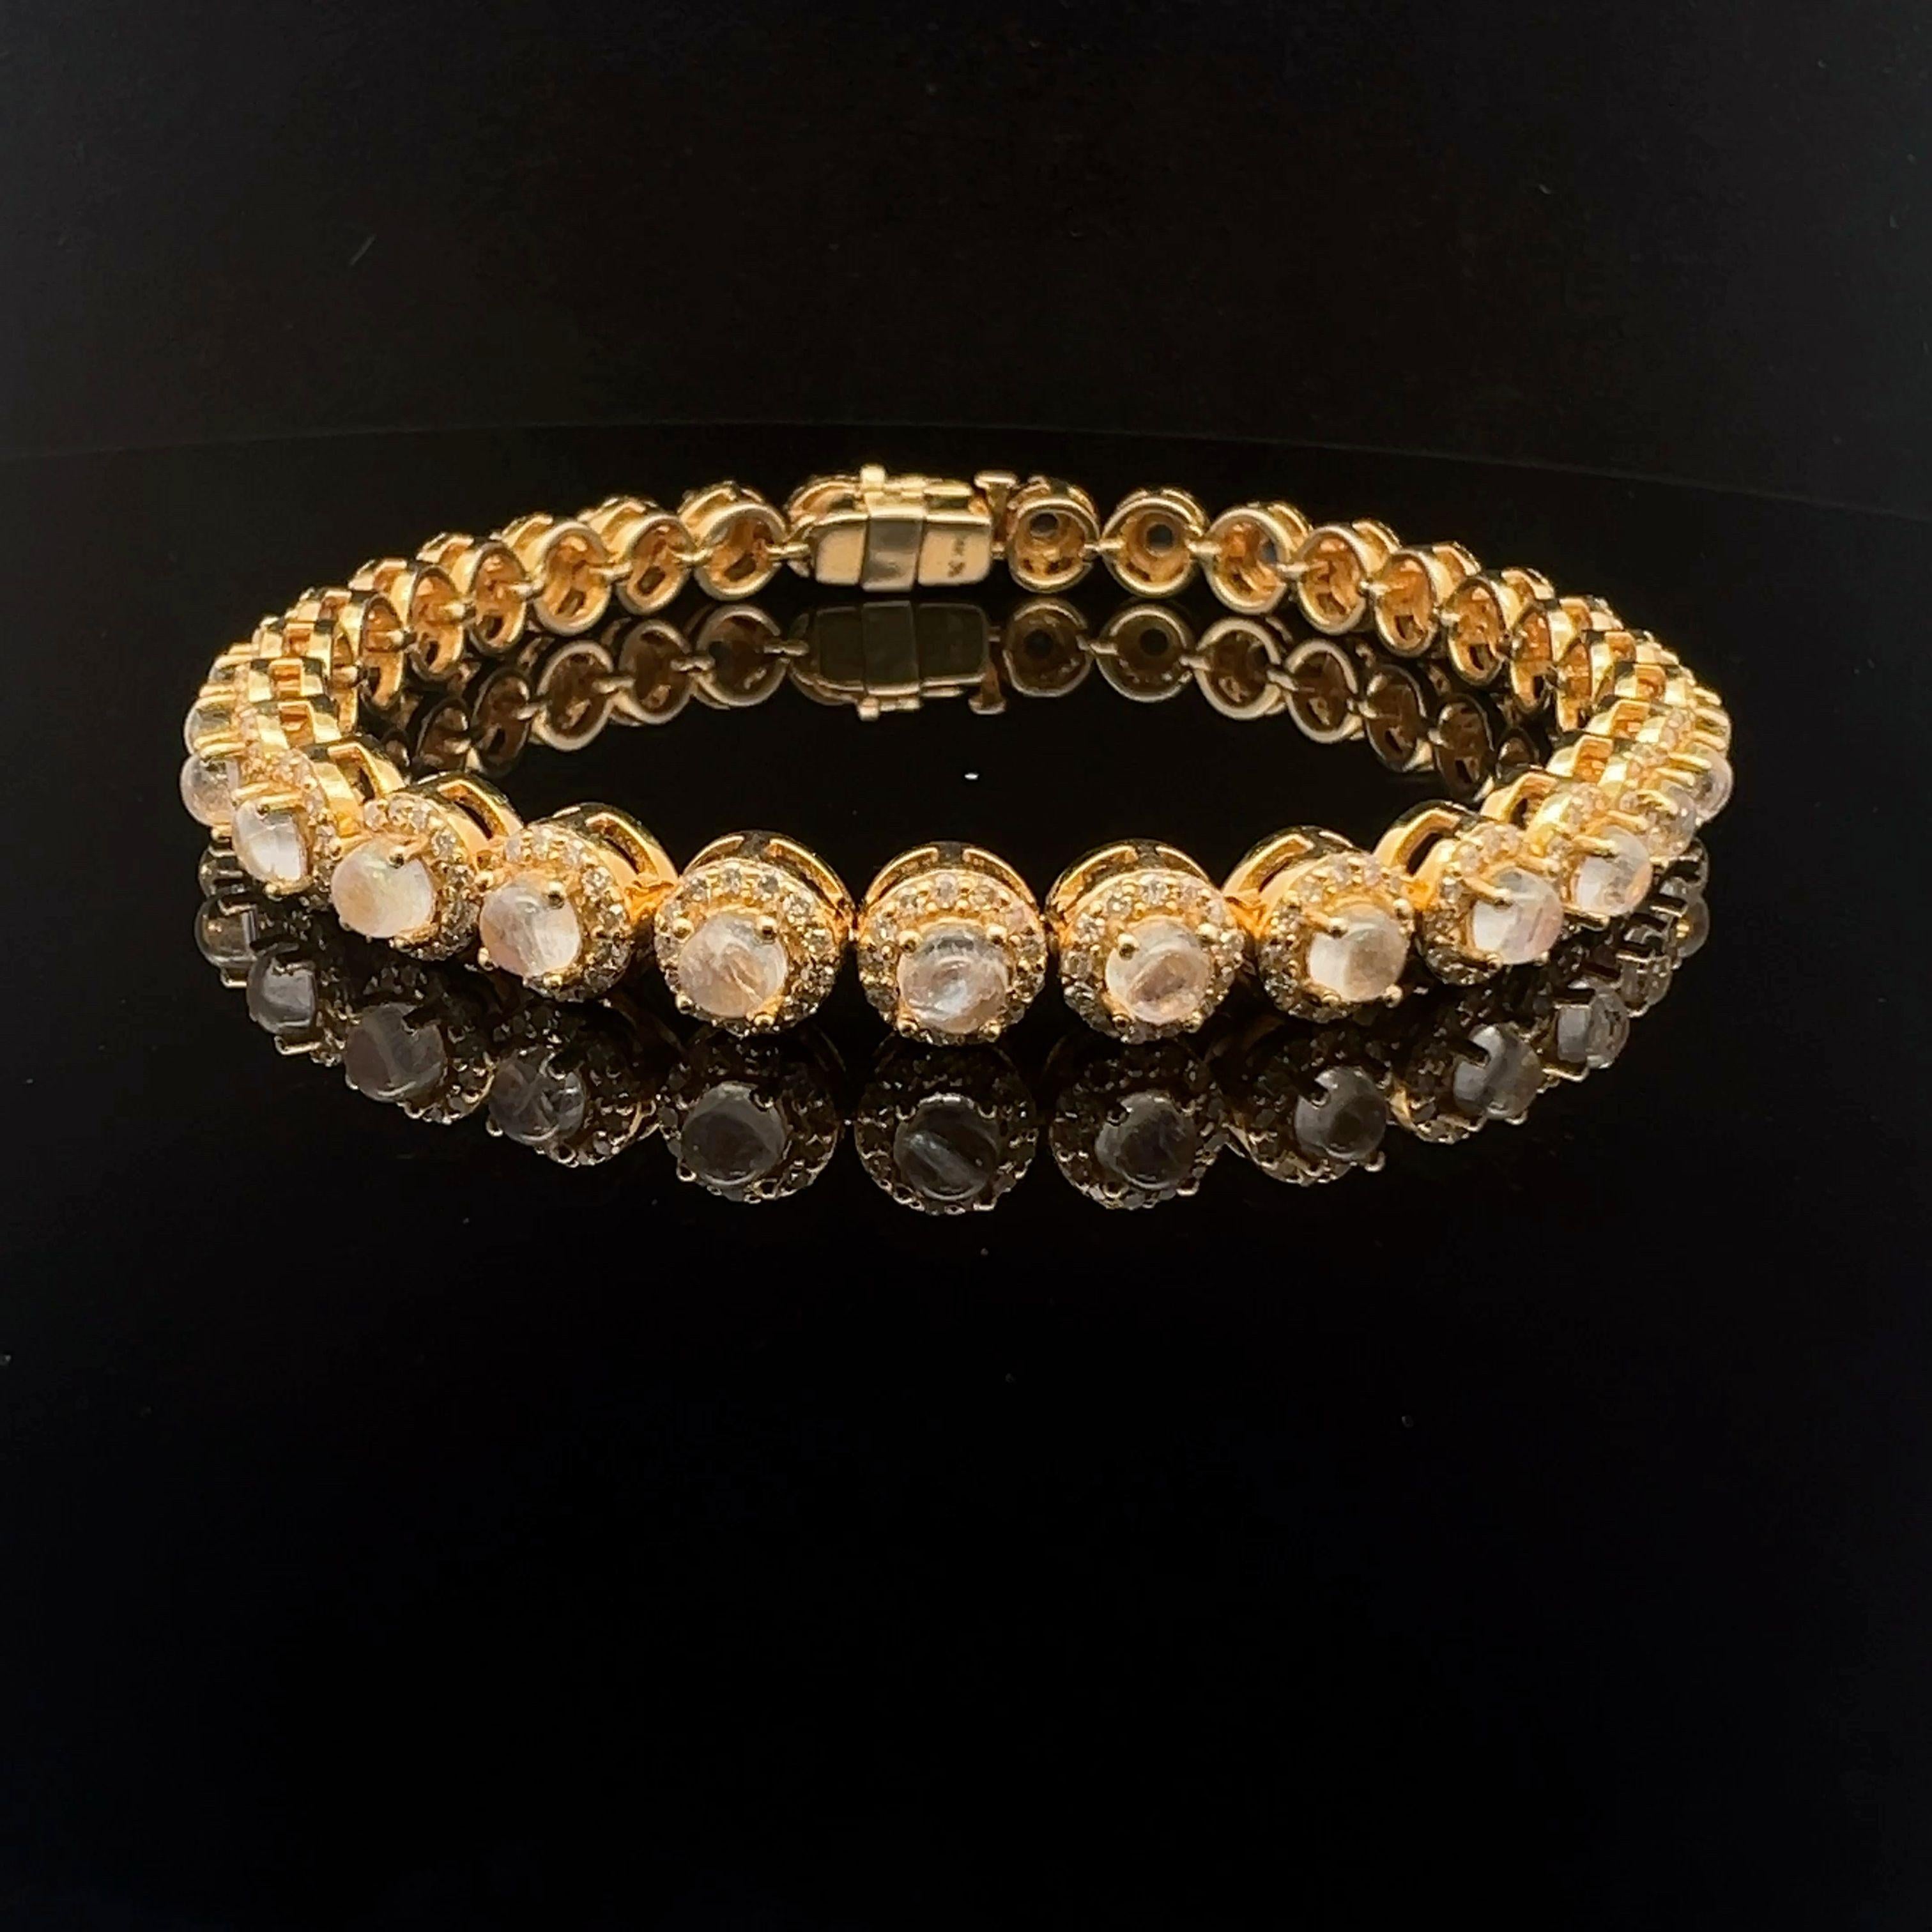 A stunning 14-karat yellow gold bracelet set with 1.7-carat diamonds and a 4.30-carat natural round moonstone. 
Carry this natural moonstone bracelet, which has a single row of moonstone beautifully surrounded by diamonds, time to adorn your wrist